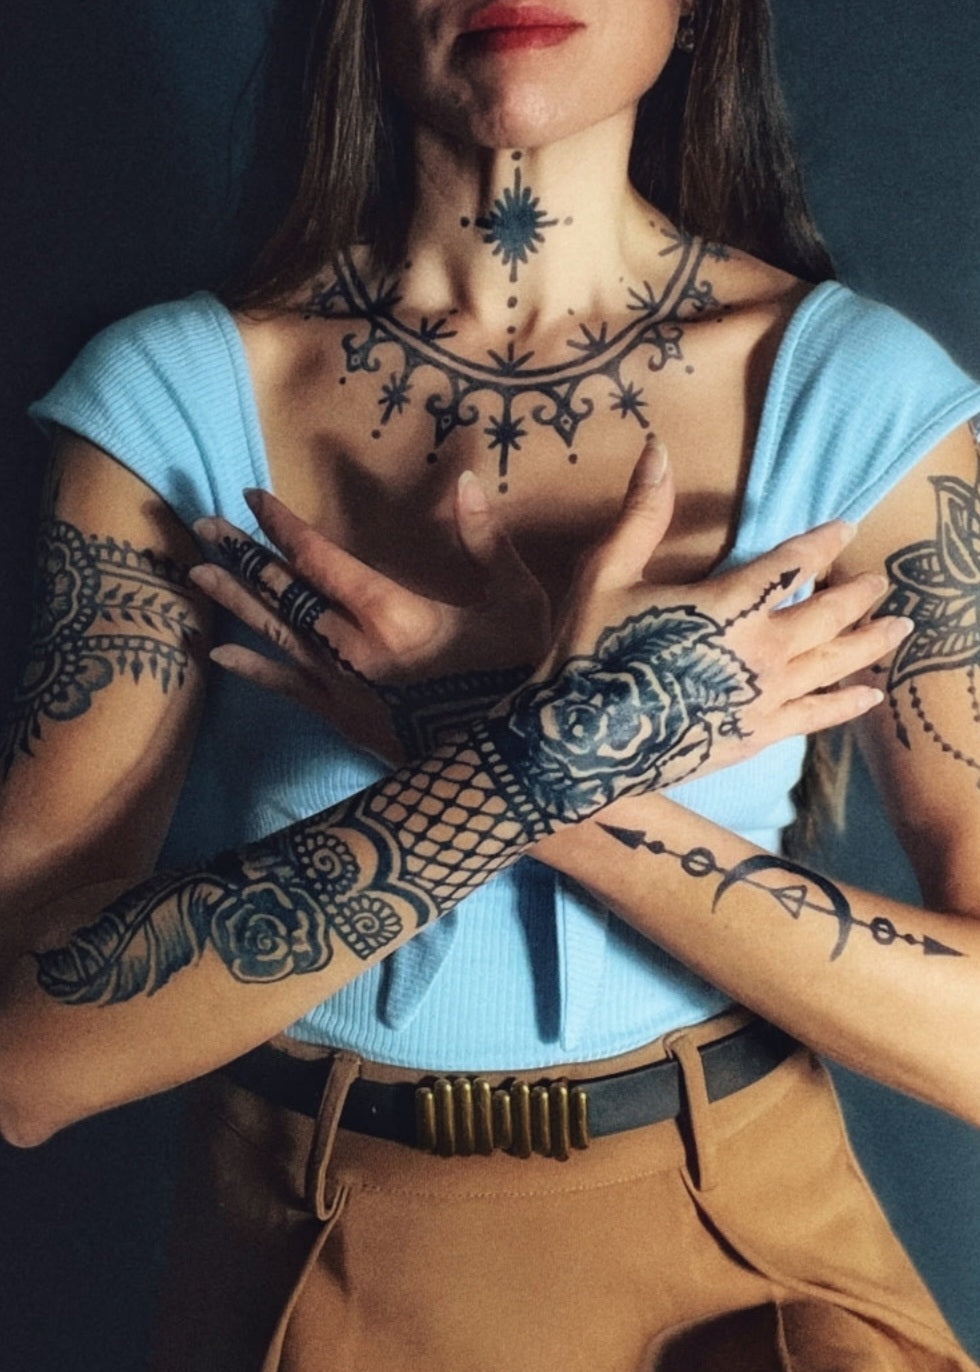 Realistic Lion Rose Flower Temporary Arm Tattoo For Women Waterproof  Compass Skull Body Art For Arms And Thigh Adult Girl Tatoos Z0403 From  Misihan09, $4.02 | DHgate.Com